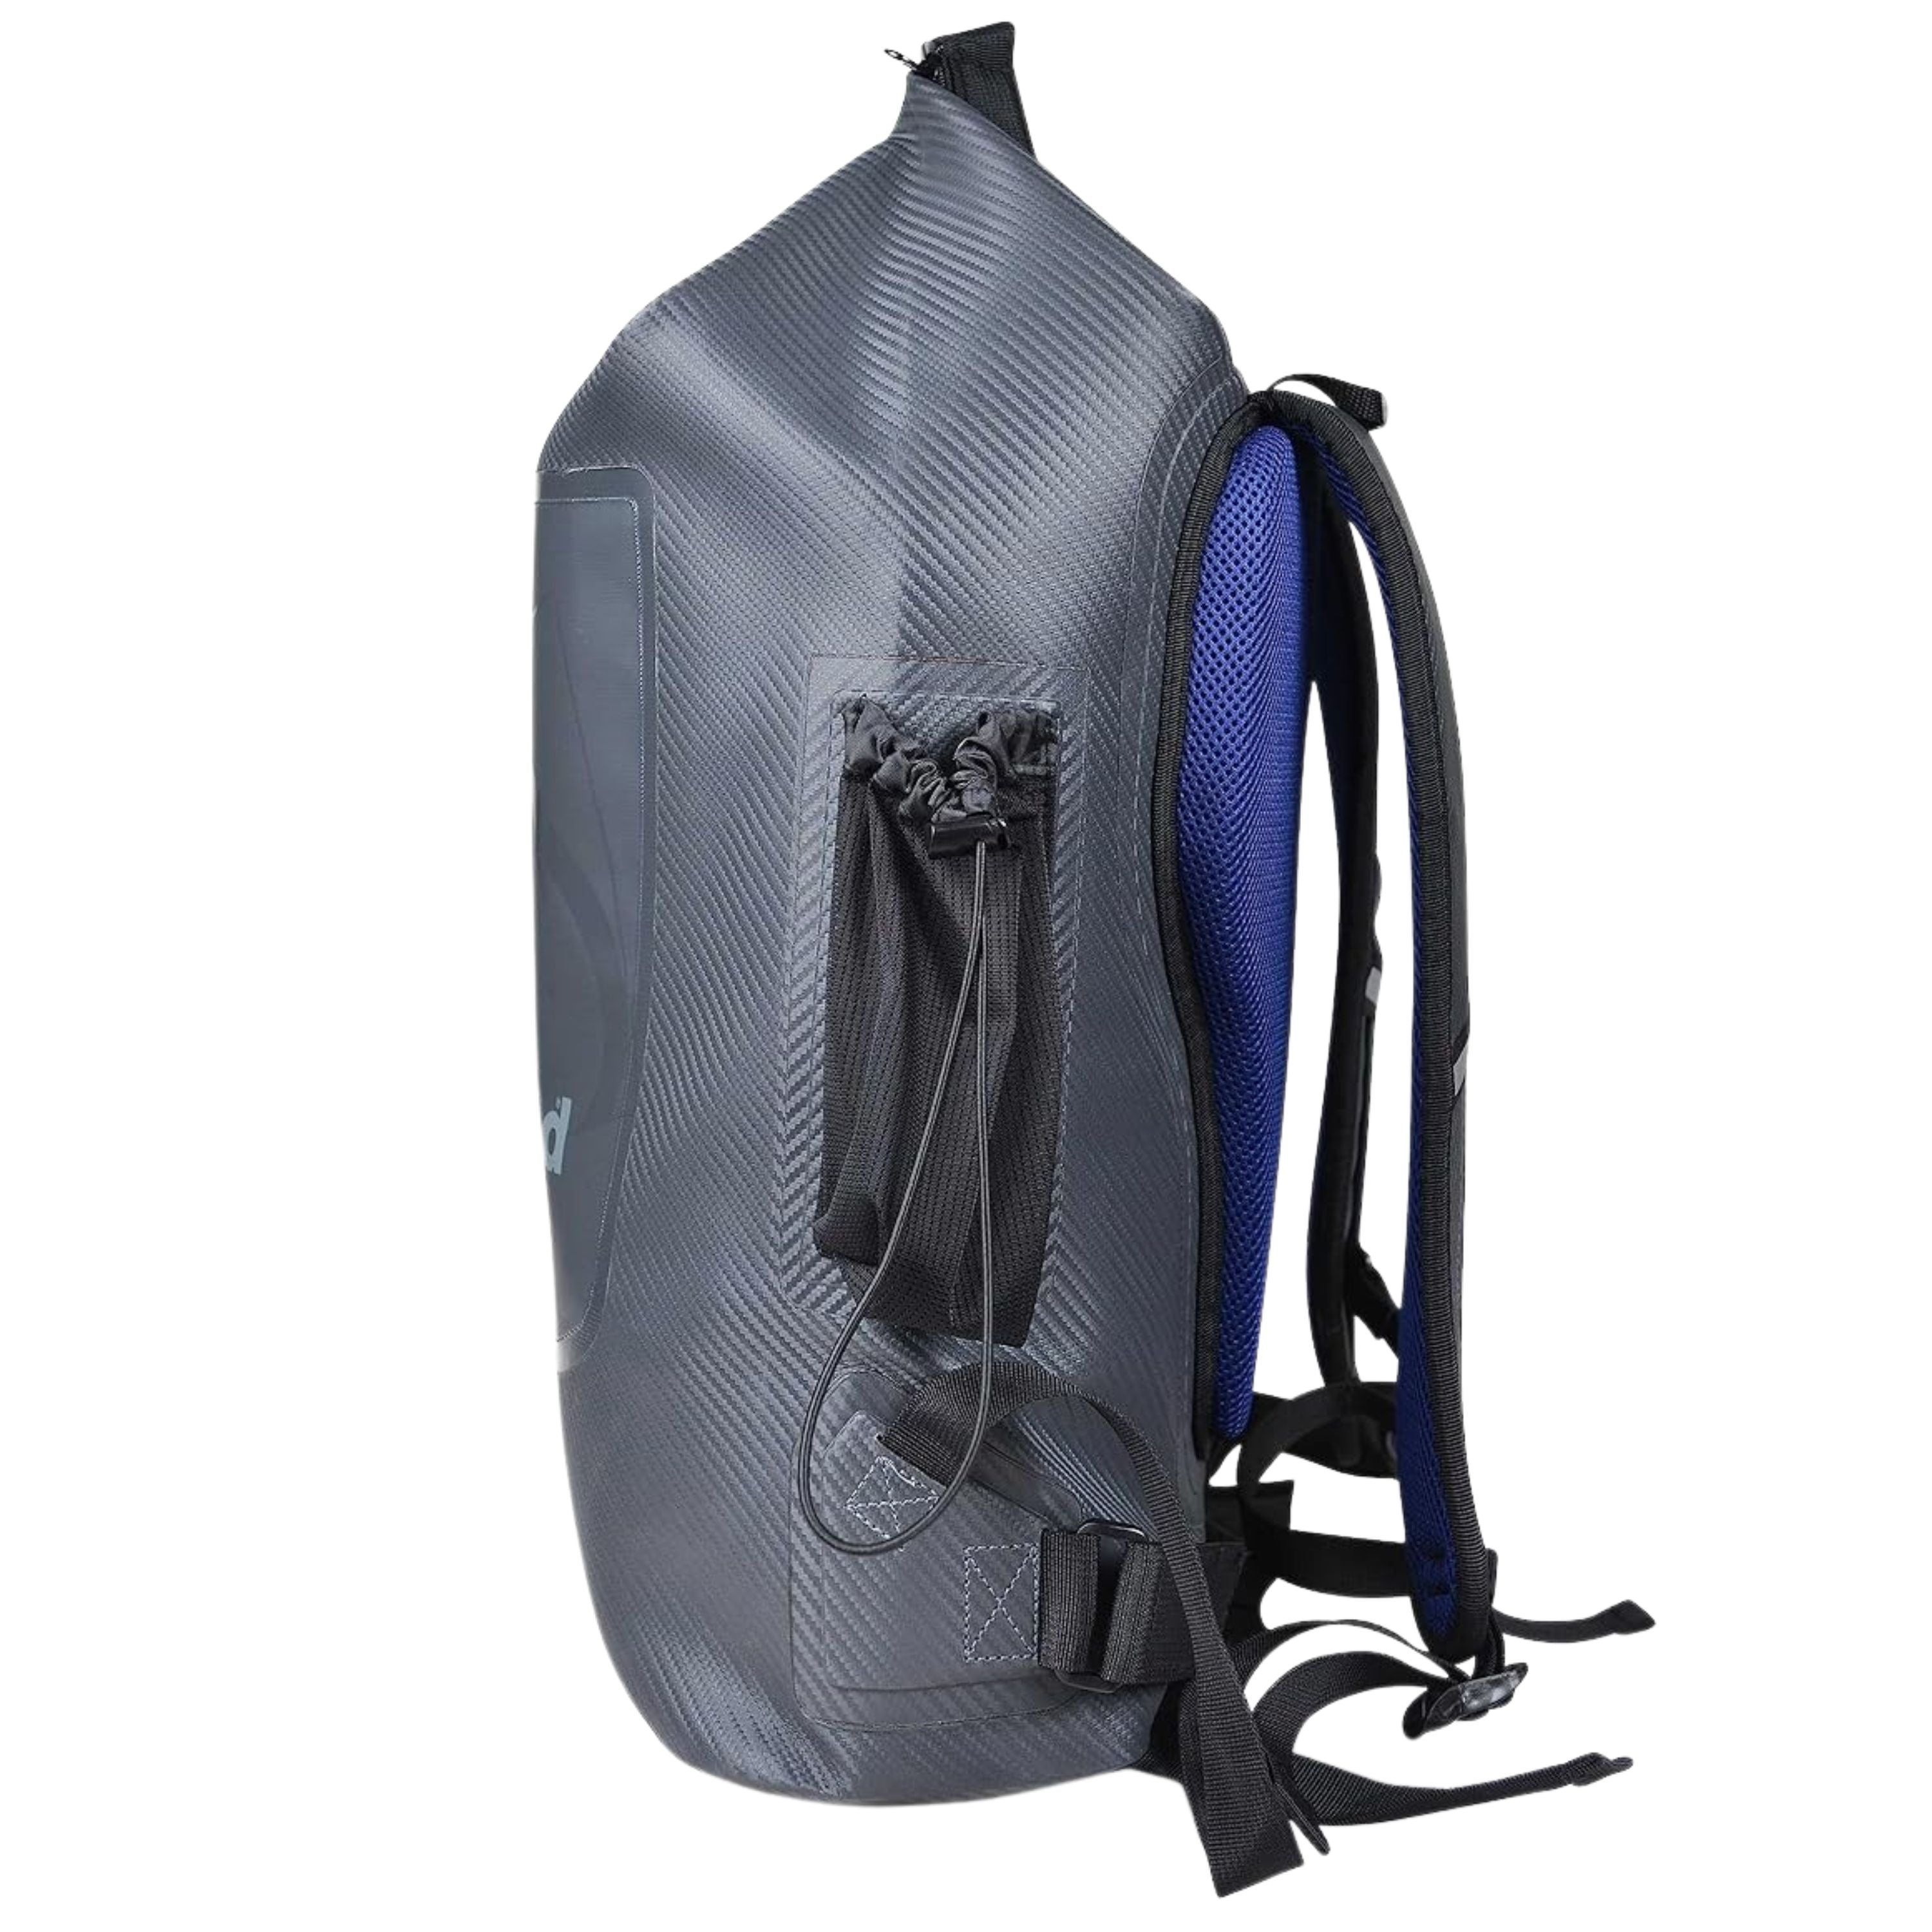 Dry backpack - 30 L